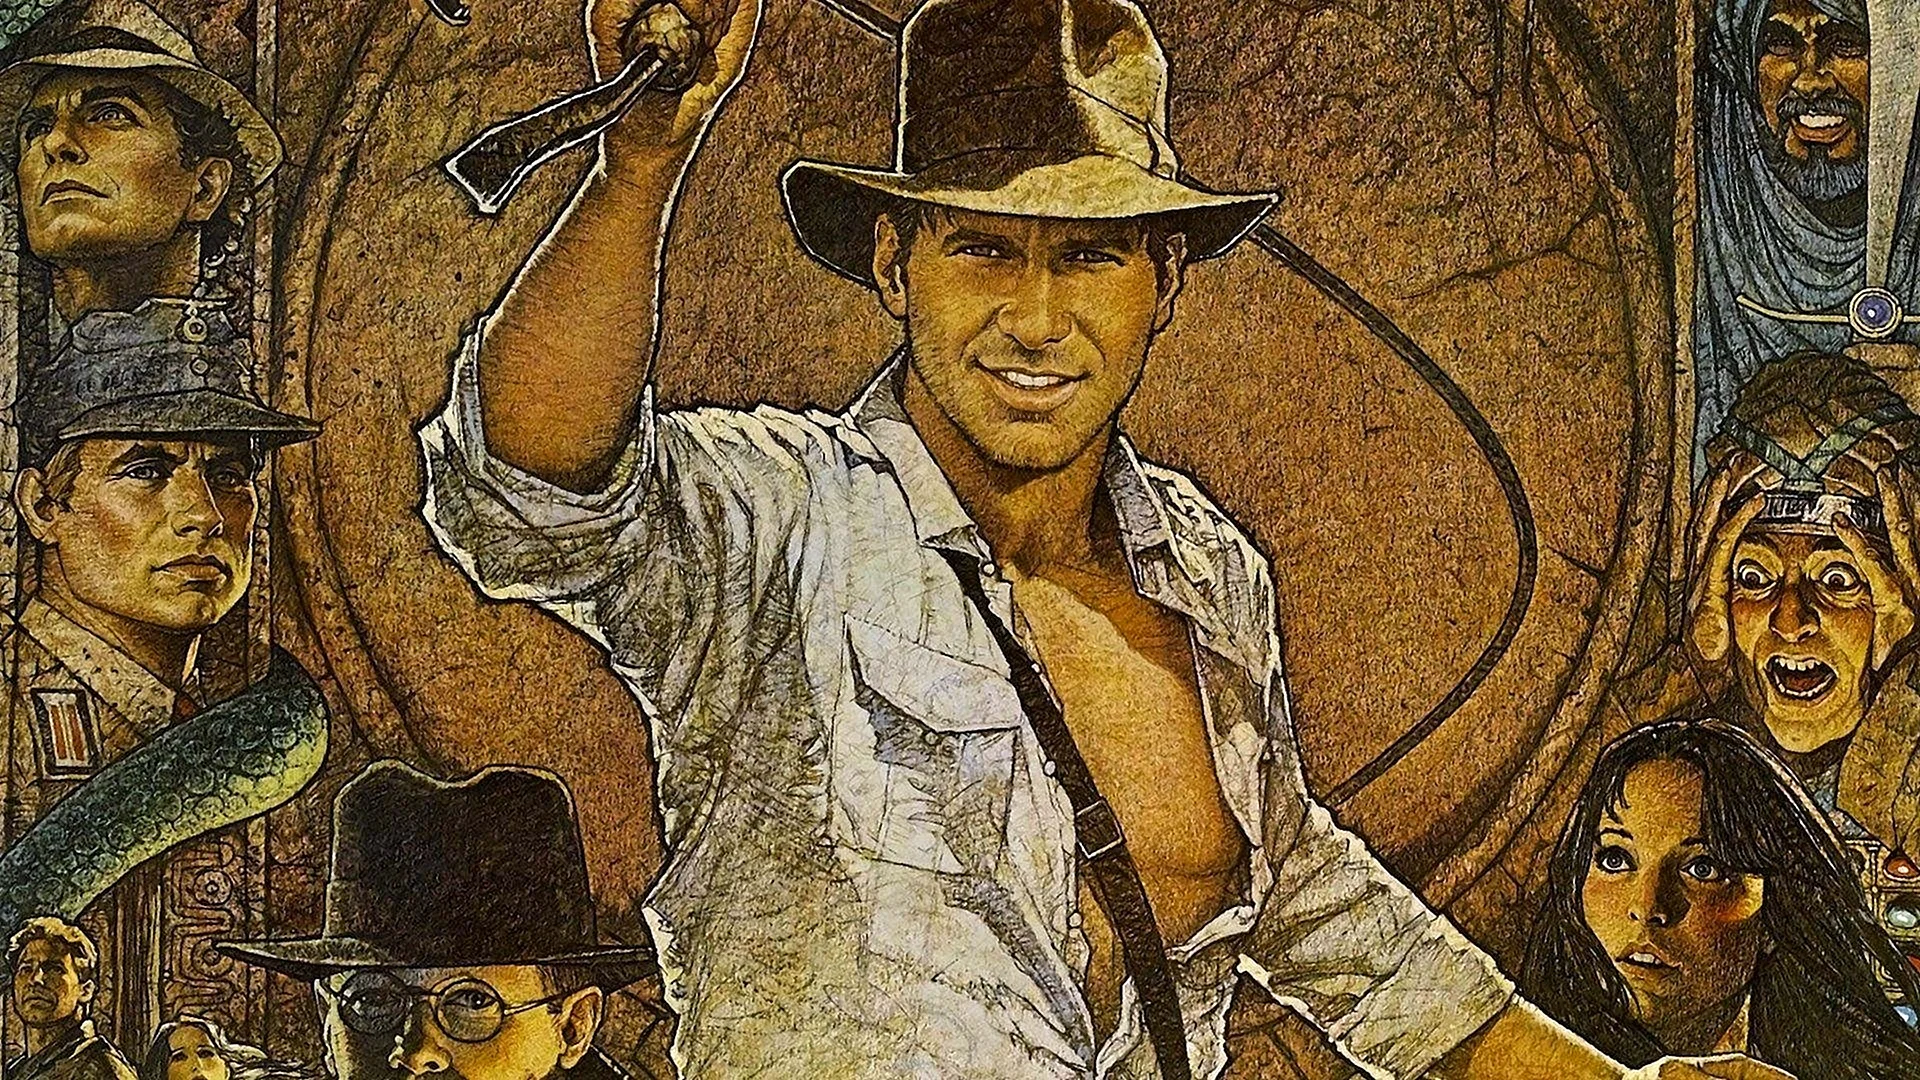 Indiana Jones And The Raiders Of The Lost Ark 1981 Wallpaper